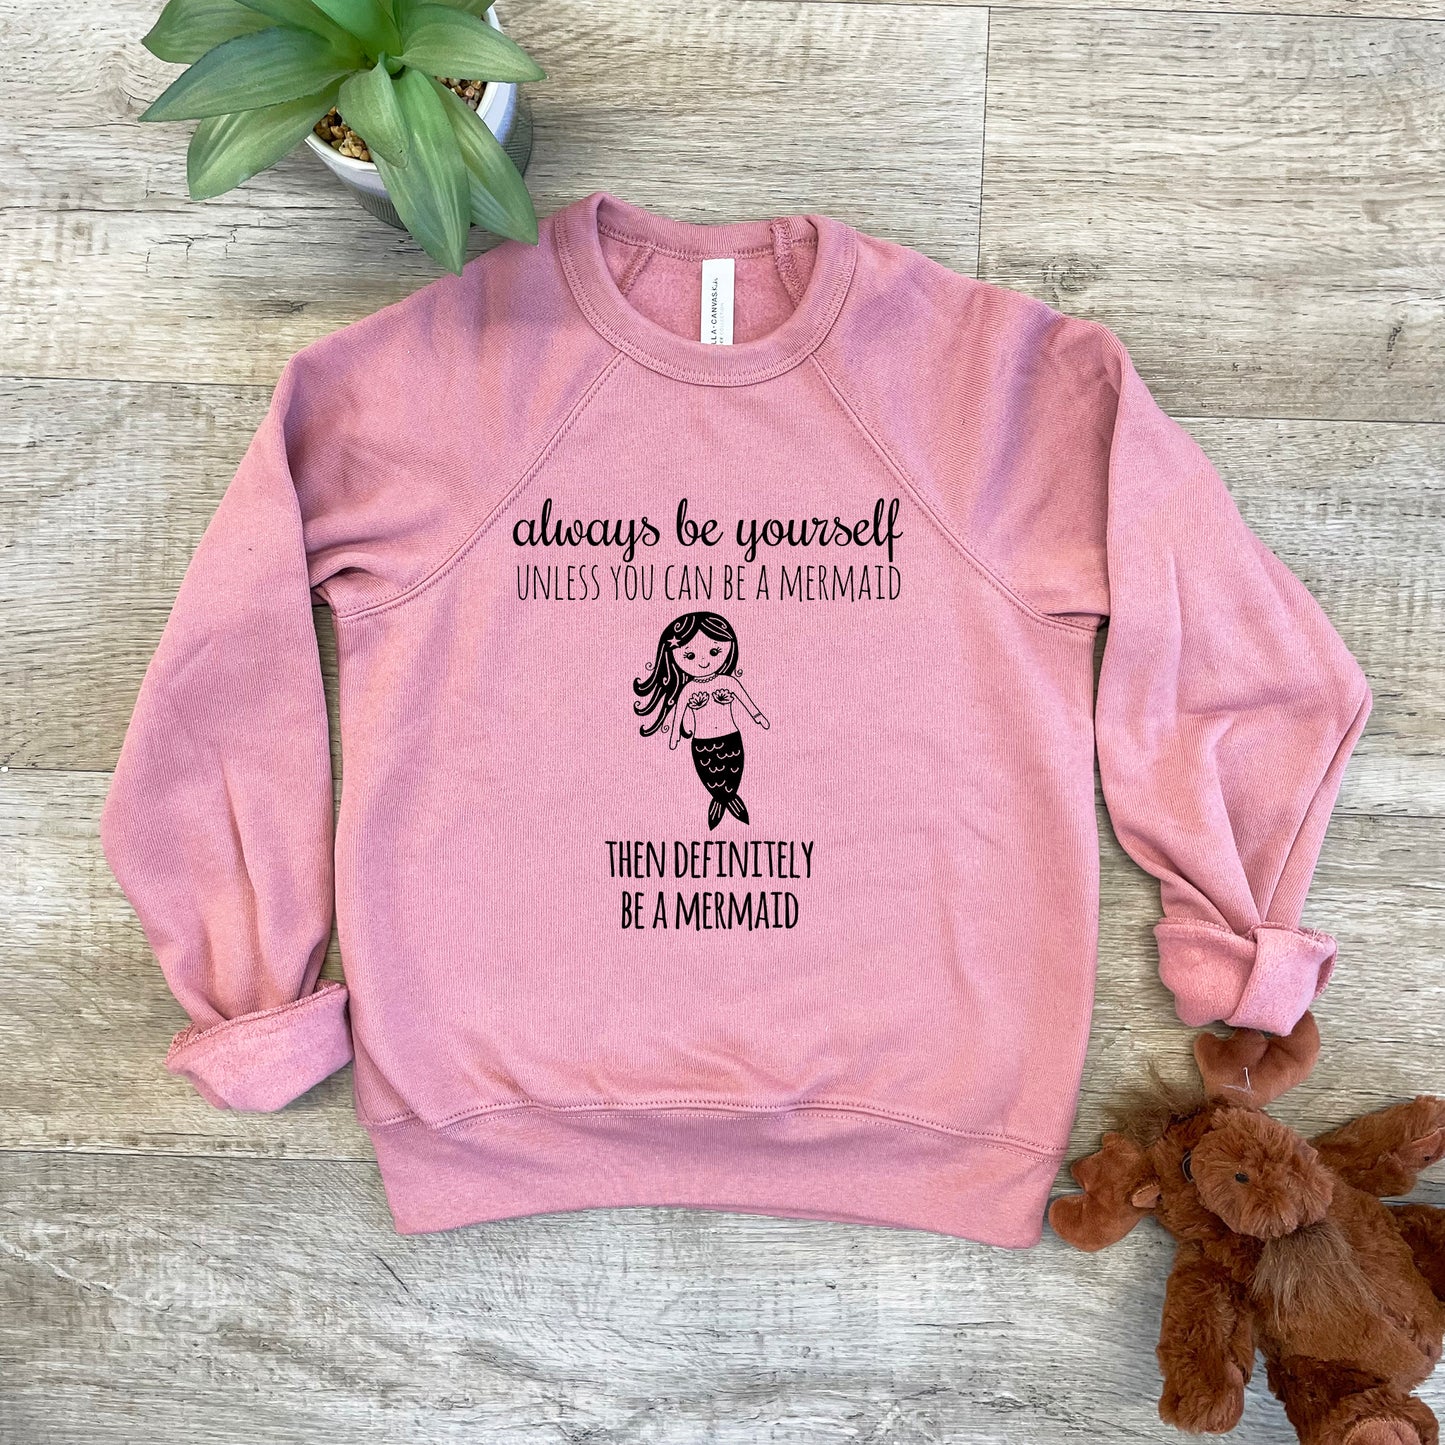 Always Be Yourself Unless You Can Be A Mermaid, Then Definitely Be A Mermaid - Kid's Sweatshirt - Heather Gray or Mauve